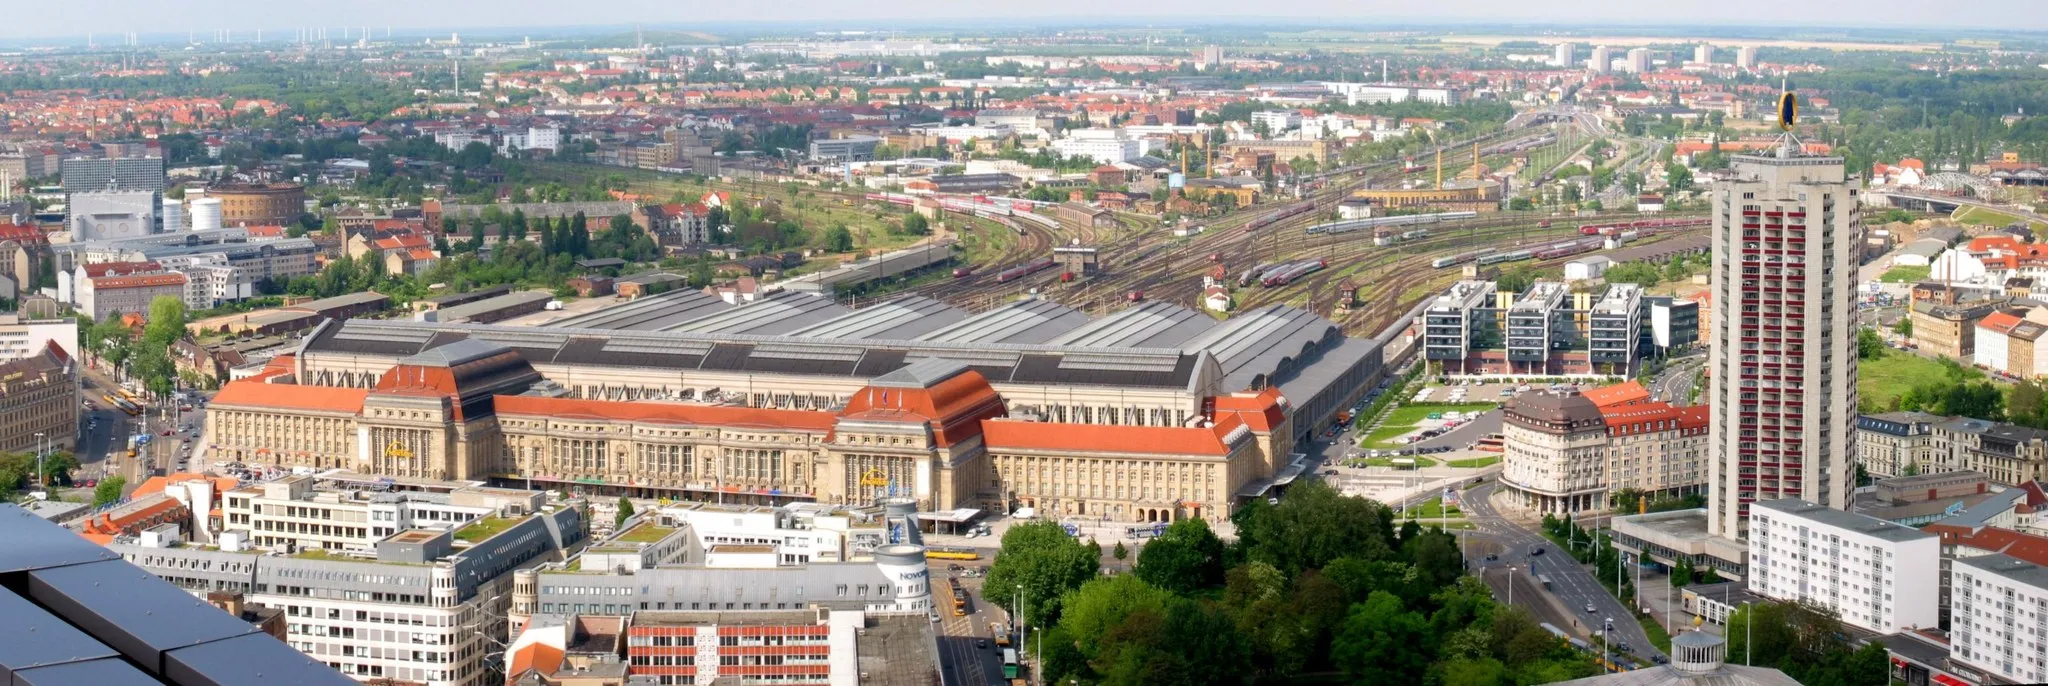 Photo showing: Leipzig central train station with its large track field
in front on the right a park with a pool (Schwanenteich), in front of the park the roof of the opera house (Oper)
on the right the high rise building Wintergartenhochhaus with the sign of Mustermesse (Leipzig fair), behind it the tracks to Engelsdorf – Riesa – Dresden (first German trunk line) and Stötteritz – Markkleeberg – Altenburg – Hof
the tracks to the north lead to Dessau – Bitterfeld and Torgau – Falkenberg/Elster
the line to the left leads to Halle and Plagwitz
on the left behind the station an old goods station (Freiladebahnhof), behind it the unused gas holder Gasometer Nord